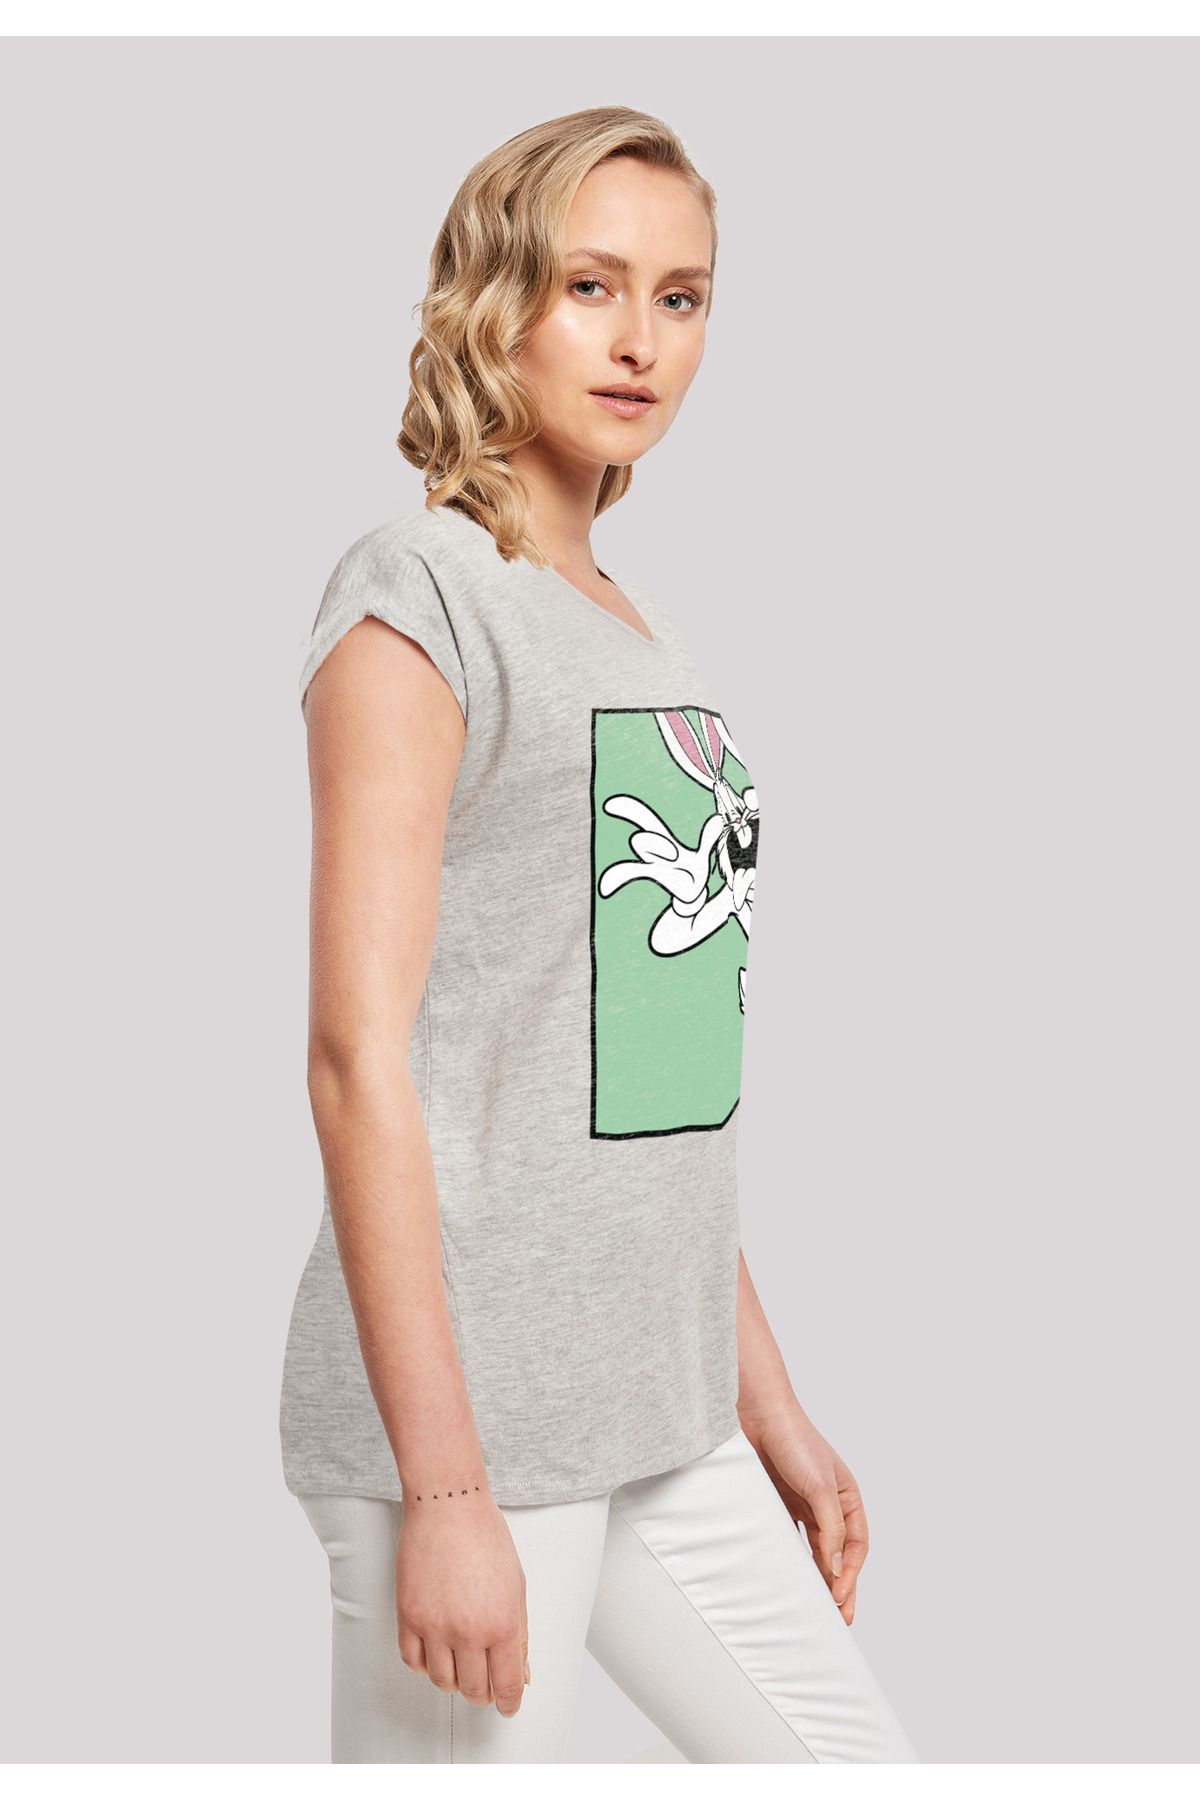 Funny Tunes Bugs Extended Damen Shoulder Tee - F4NT4STIC Bunny Looney Trendyol Face-WHT mit Ladies